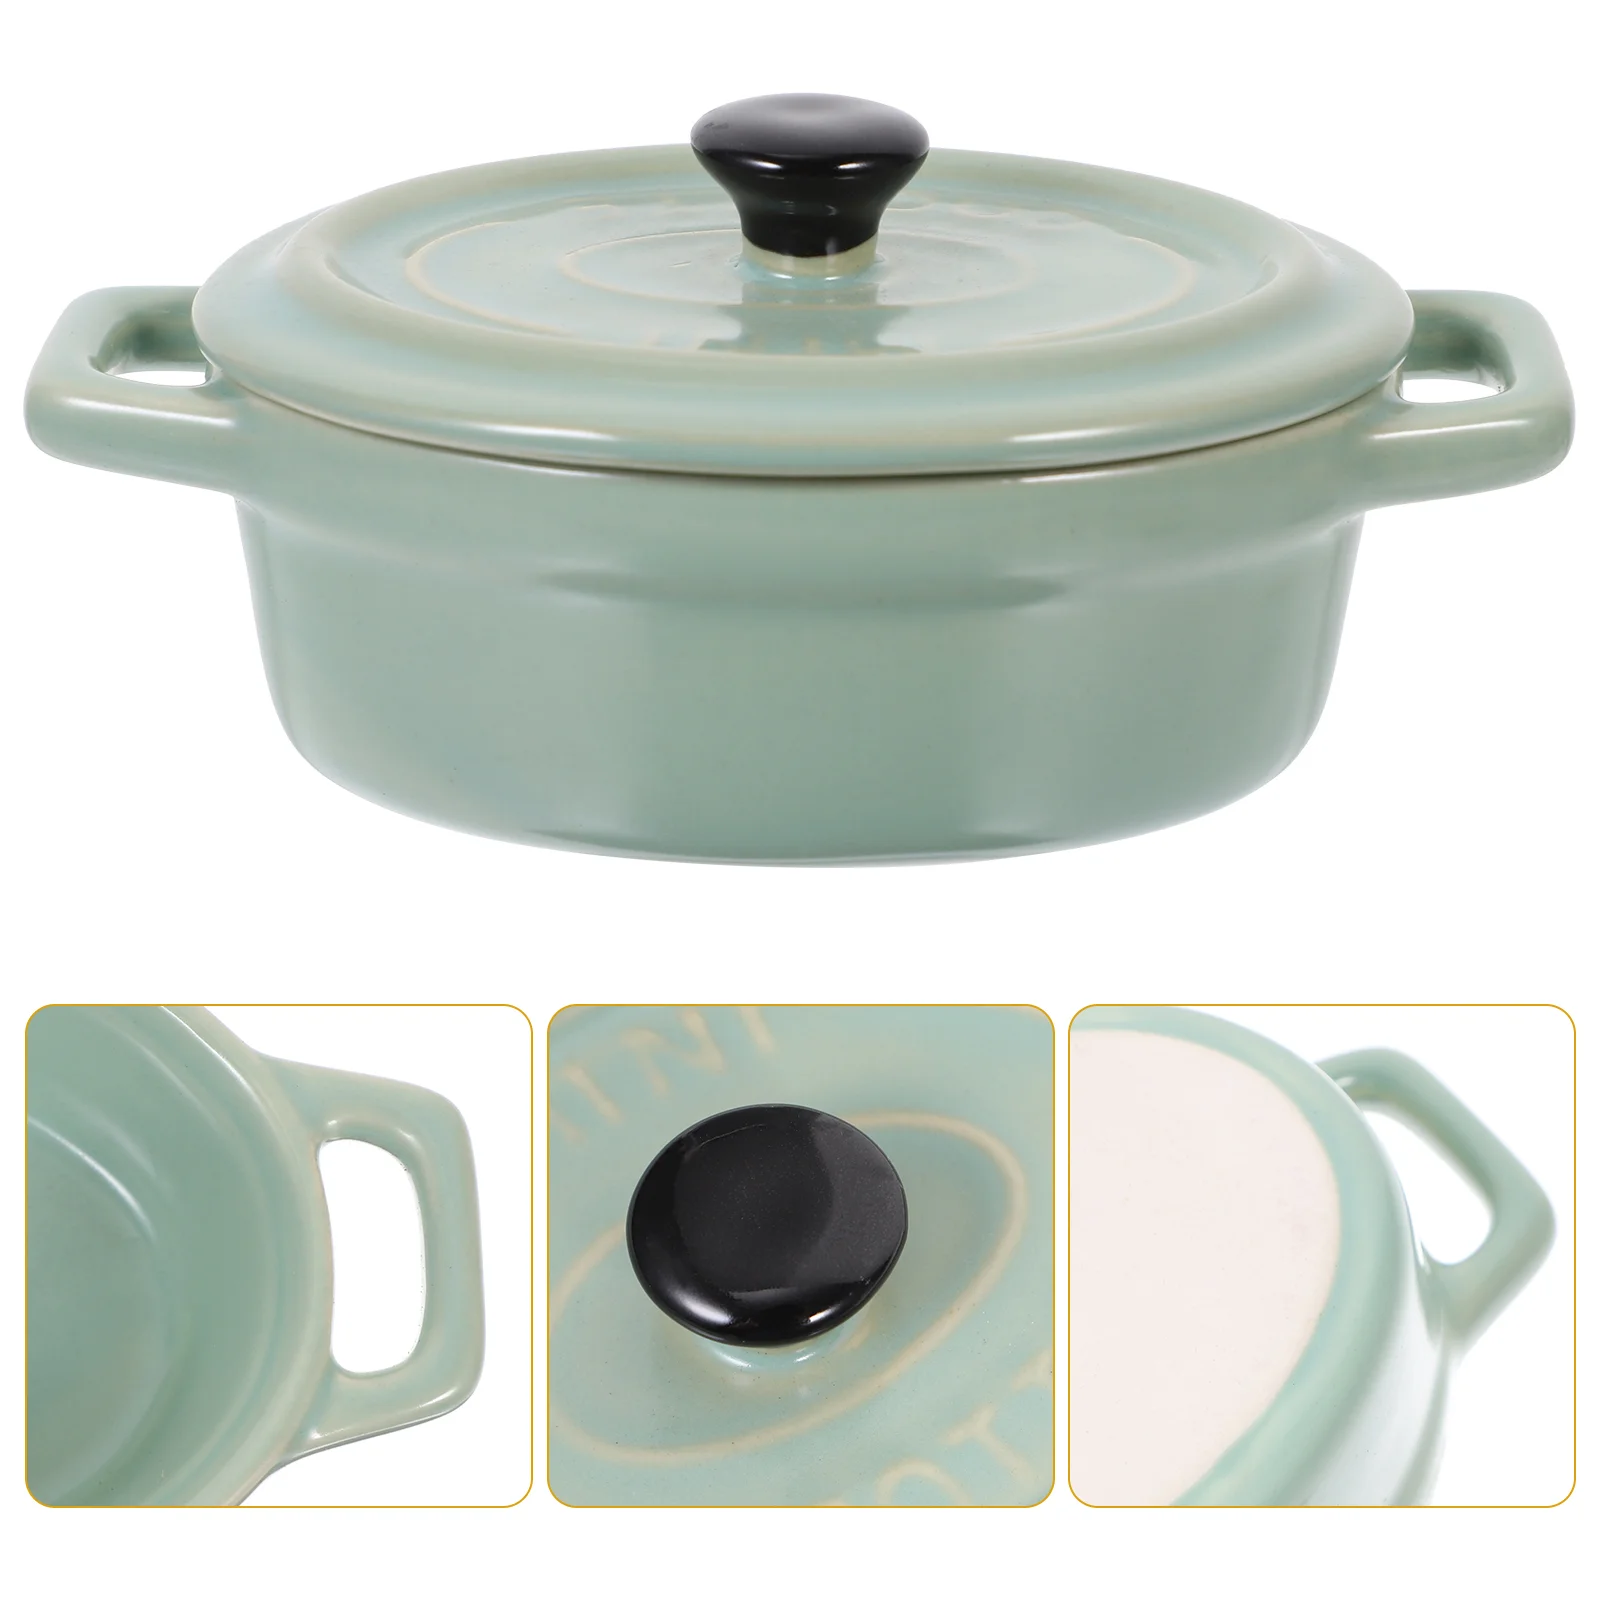 

Ceramic Bowls Oven Safe Bowls Home Ceramic Dinnerware Soup Bowl Double Ears Baking Bowl with Lid for Microwave Oven Safe Use